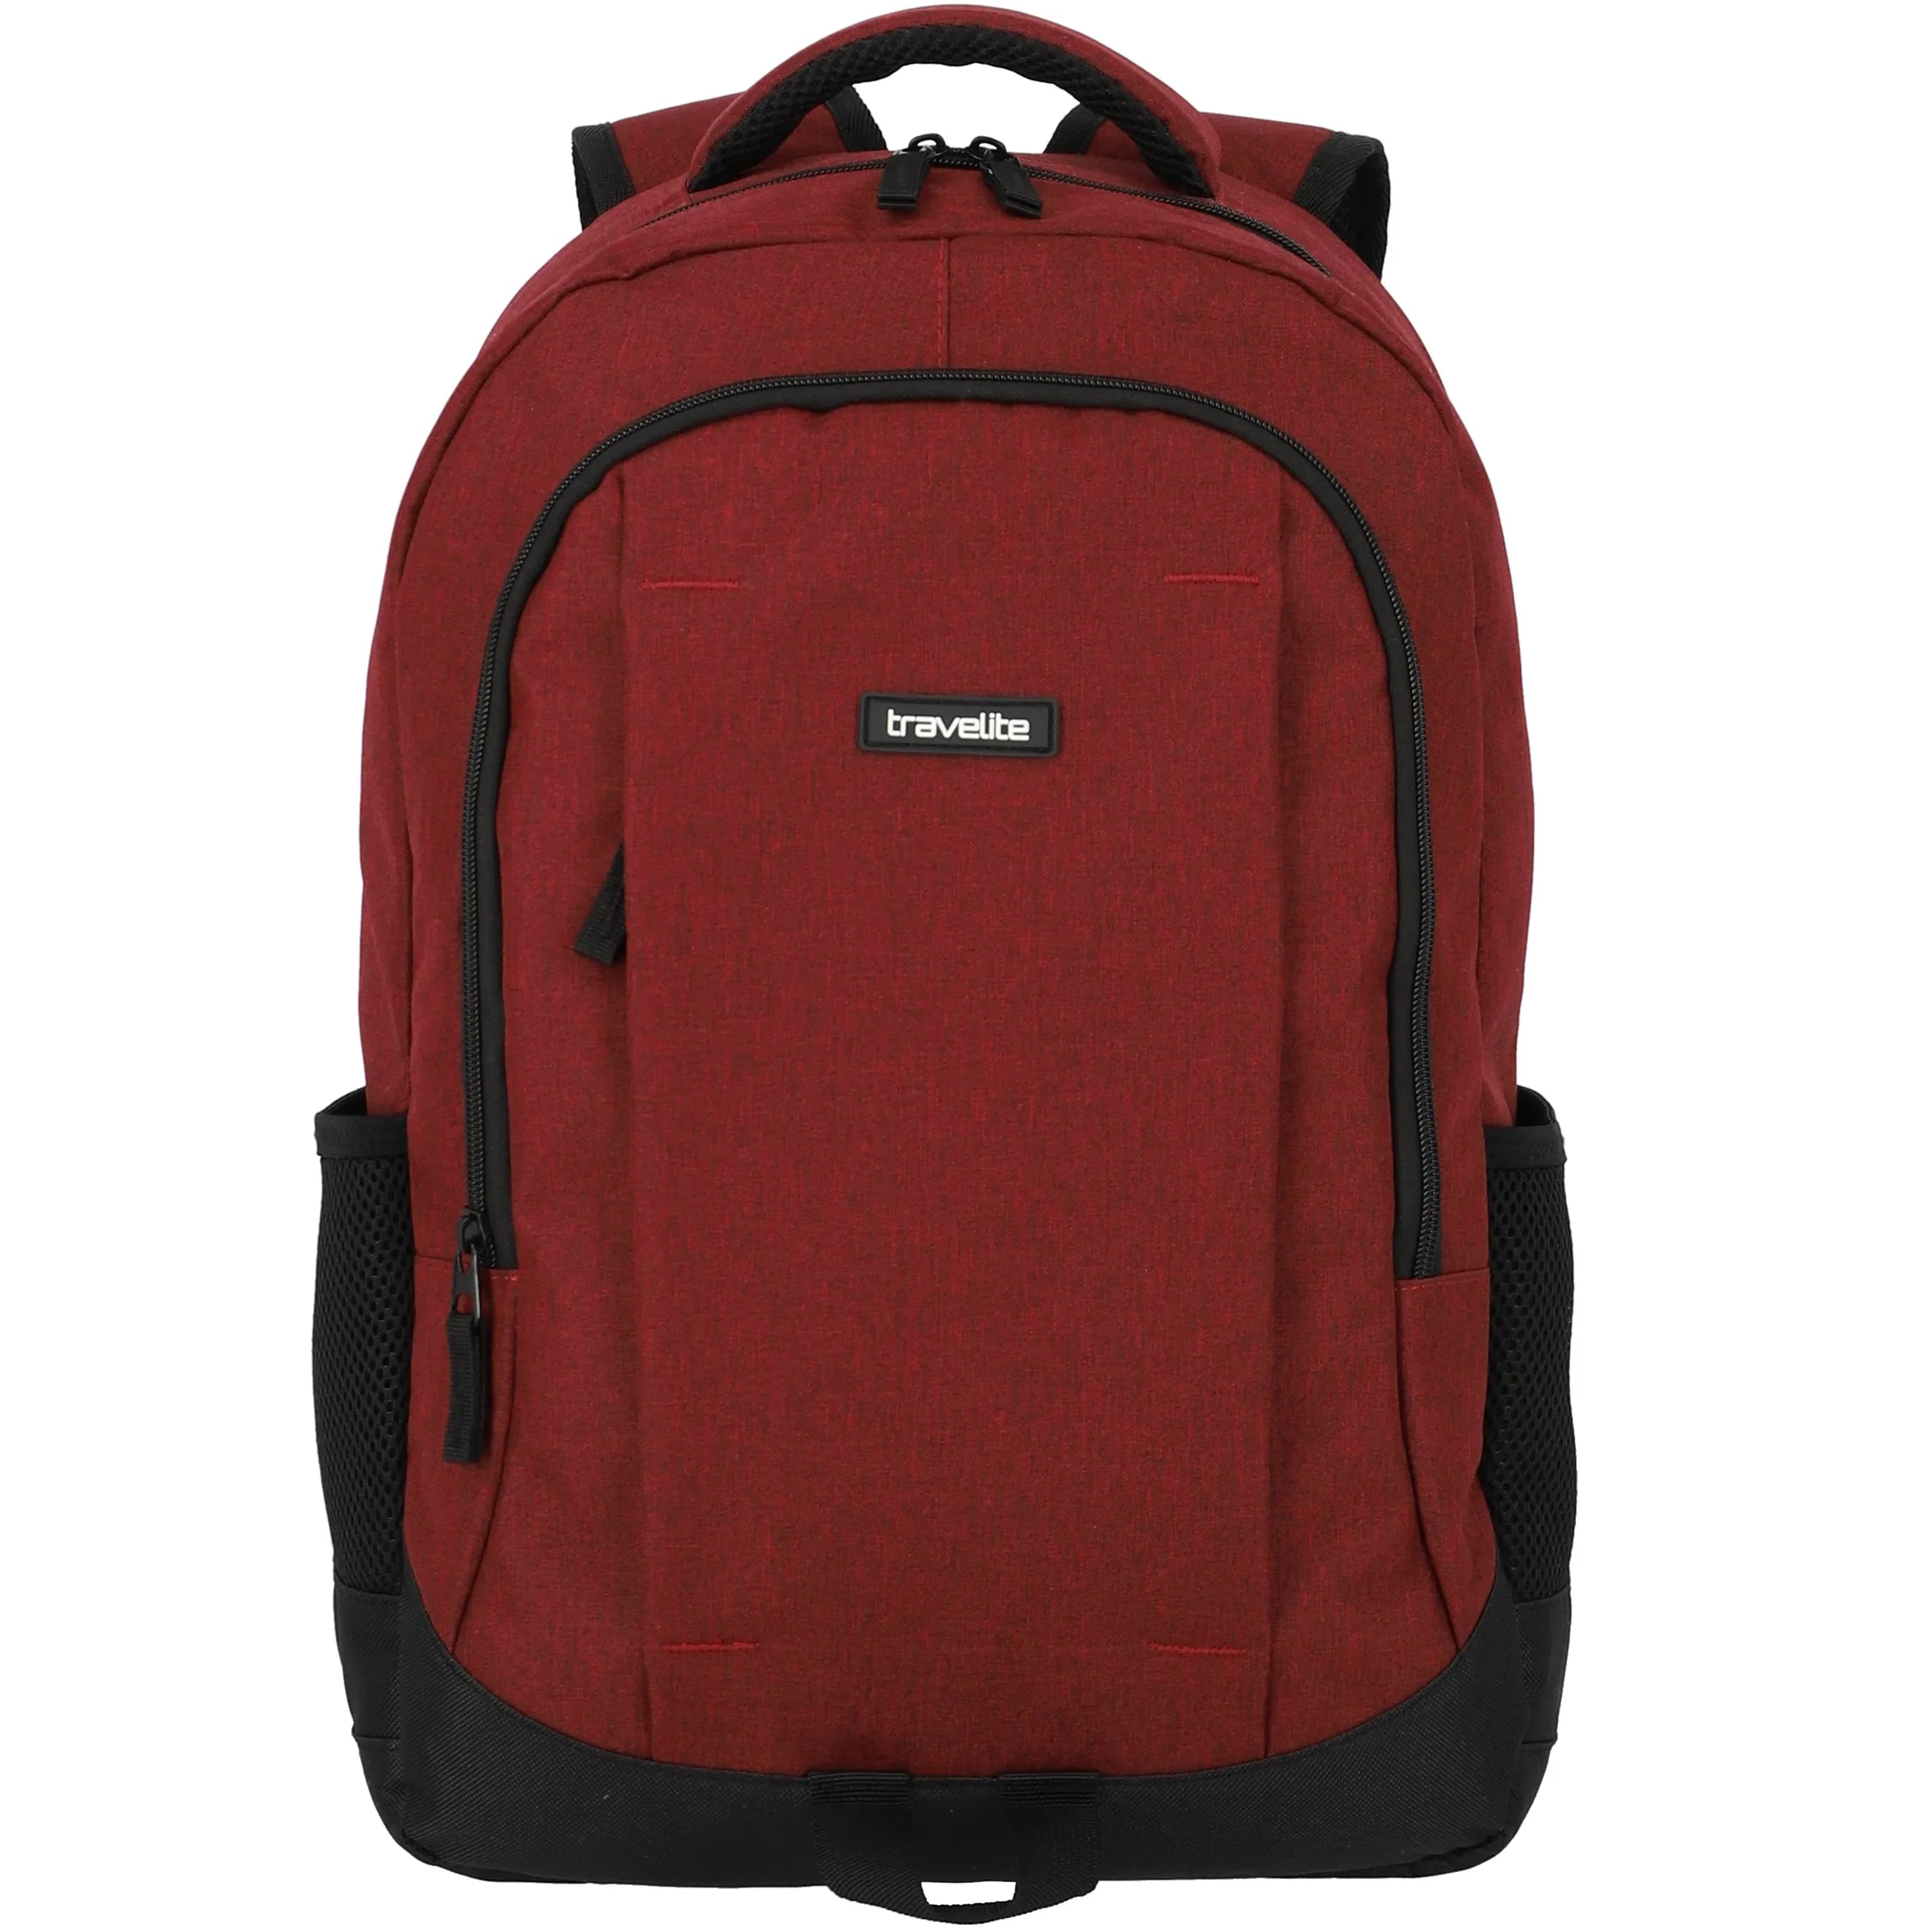 Travelite Cruise Backpack 46 cm - Red